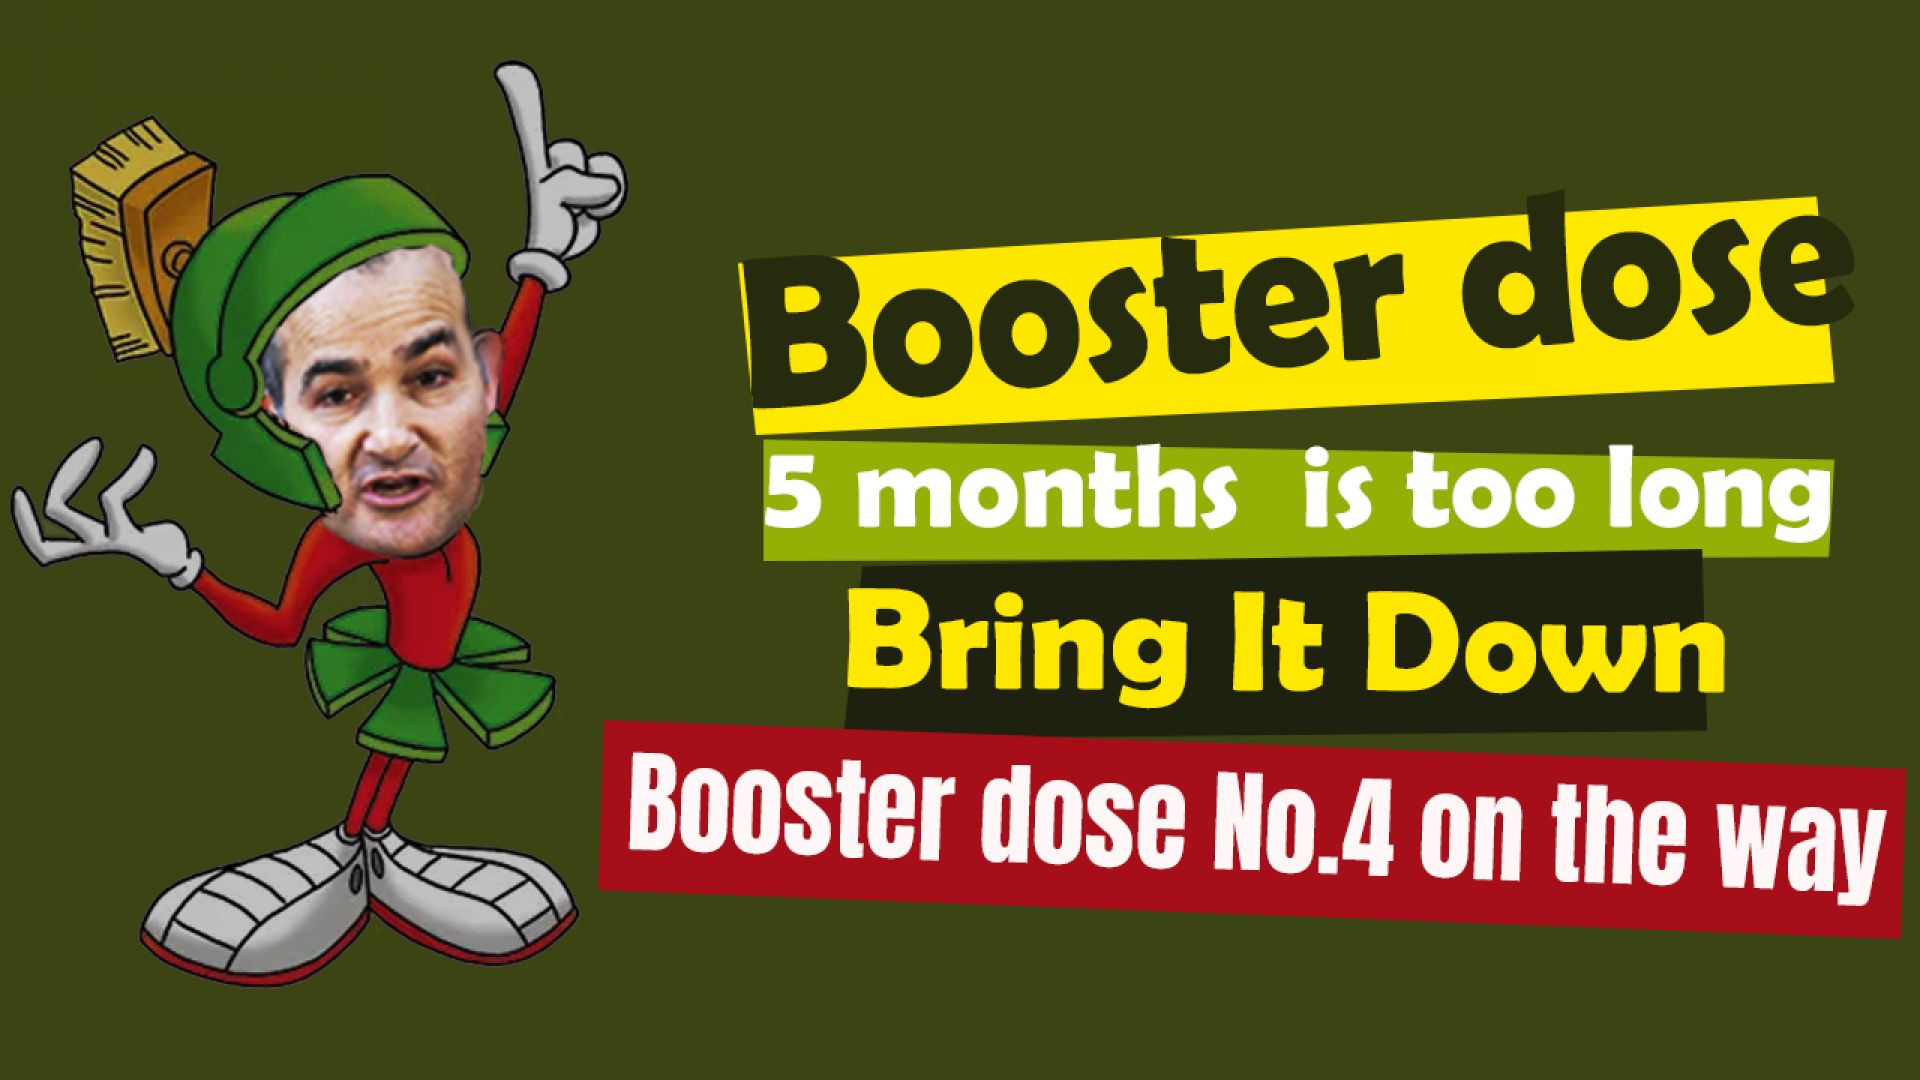 Australian Booster doses - Should be having it every 15 days